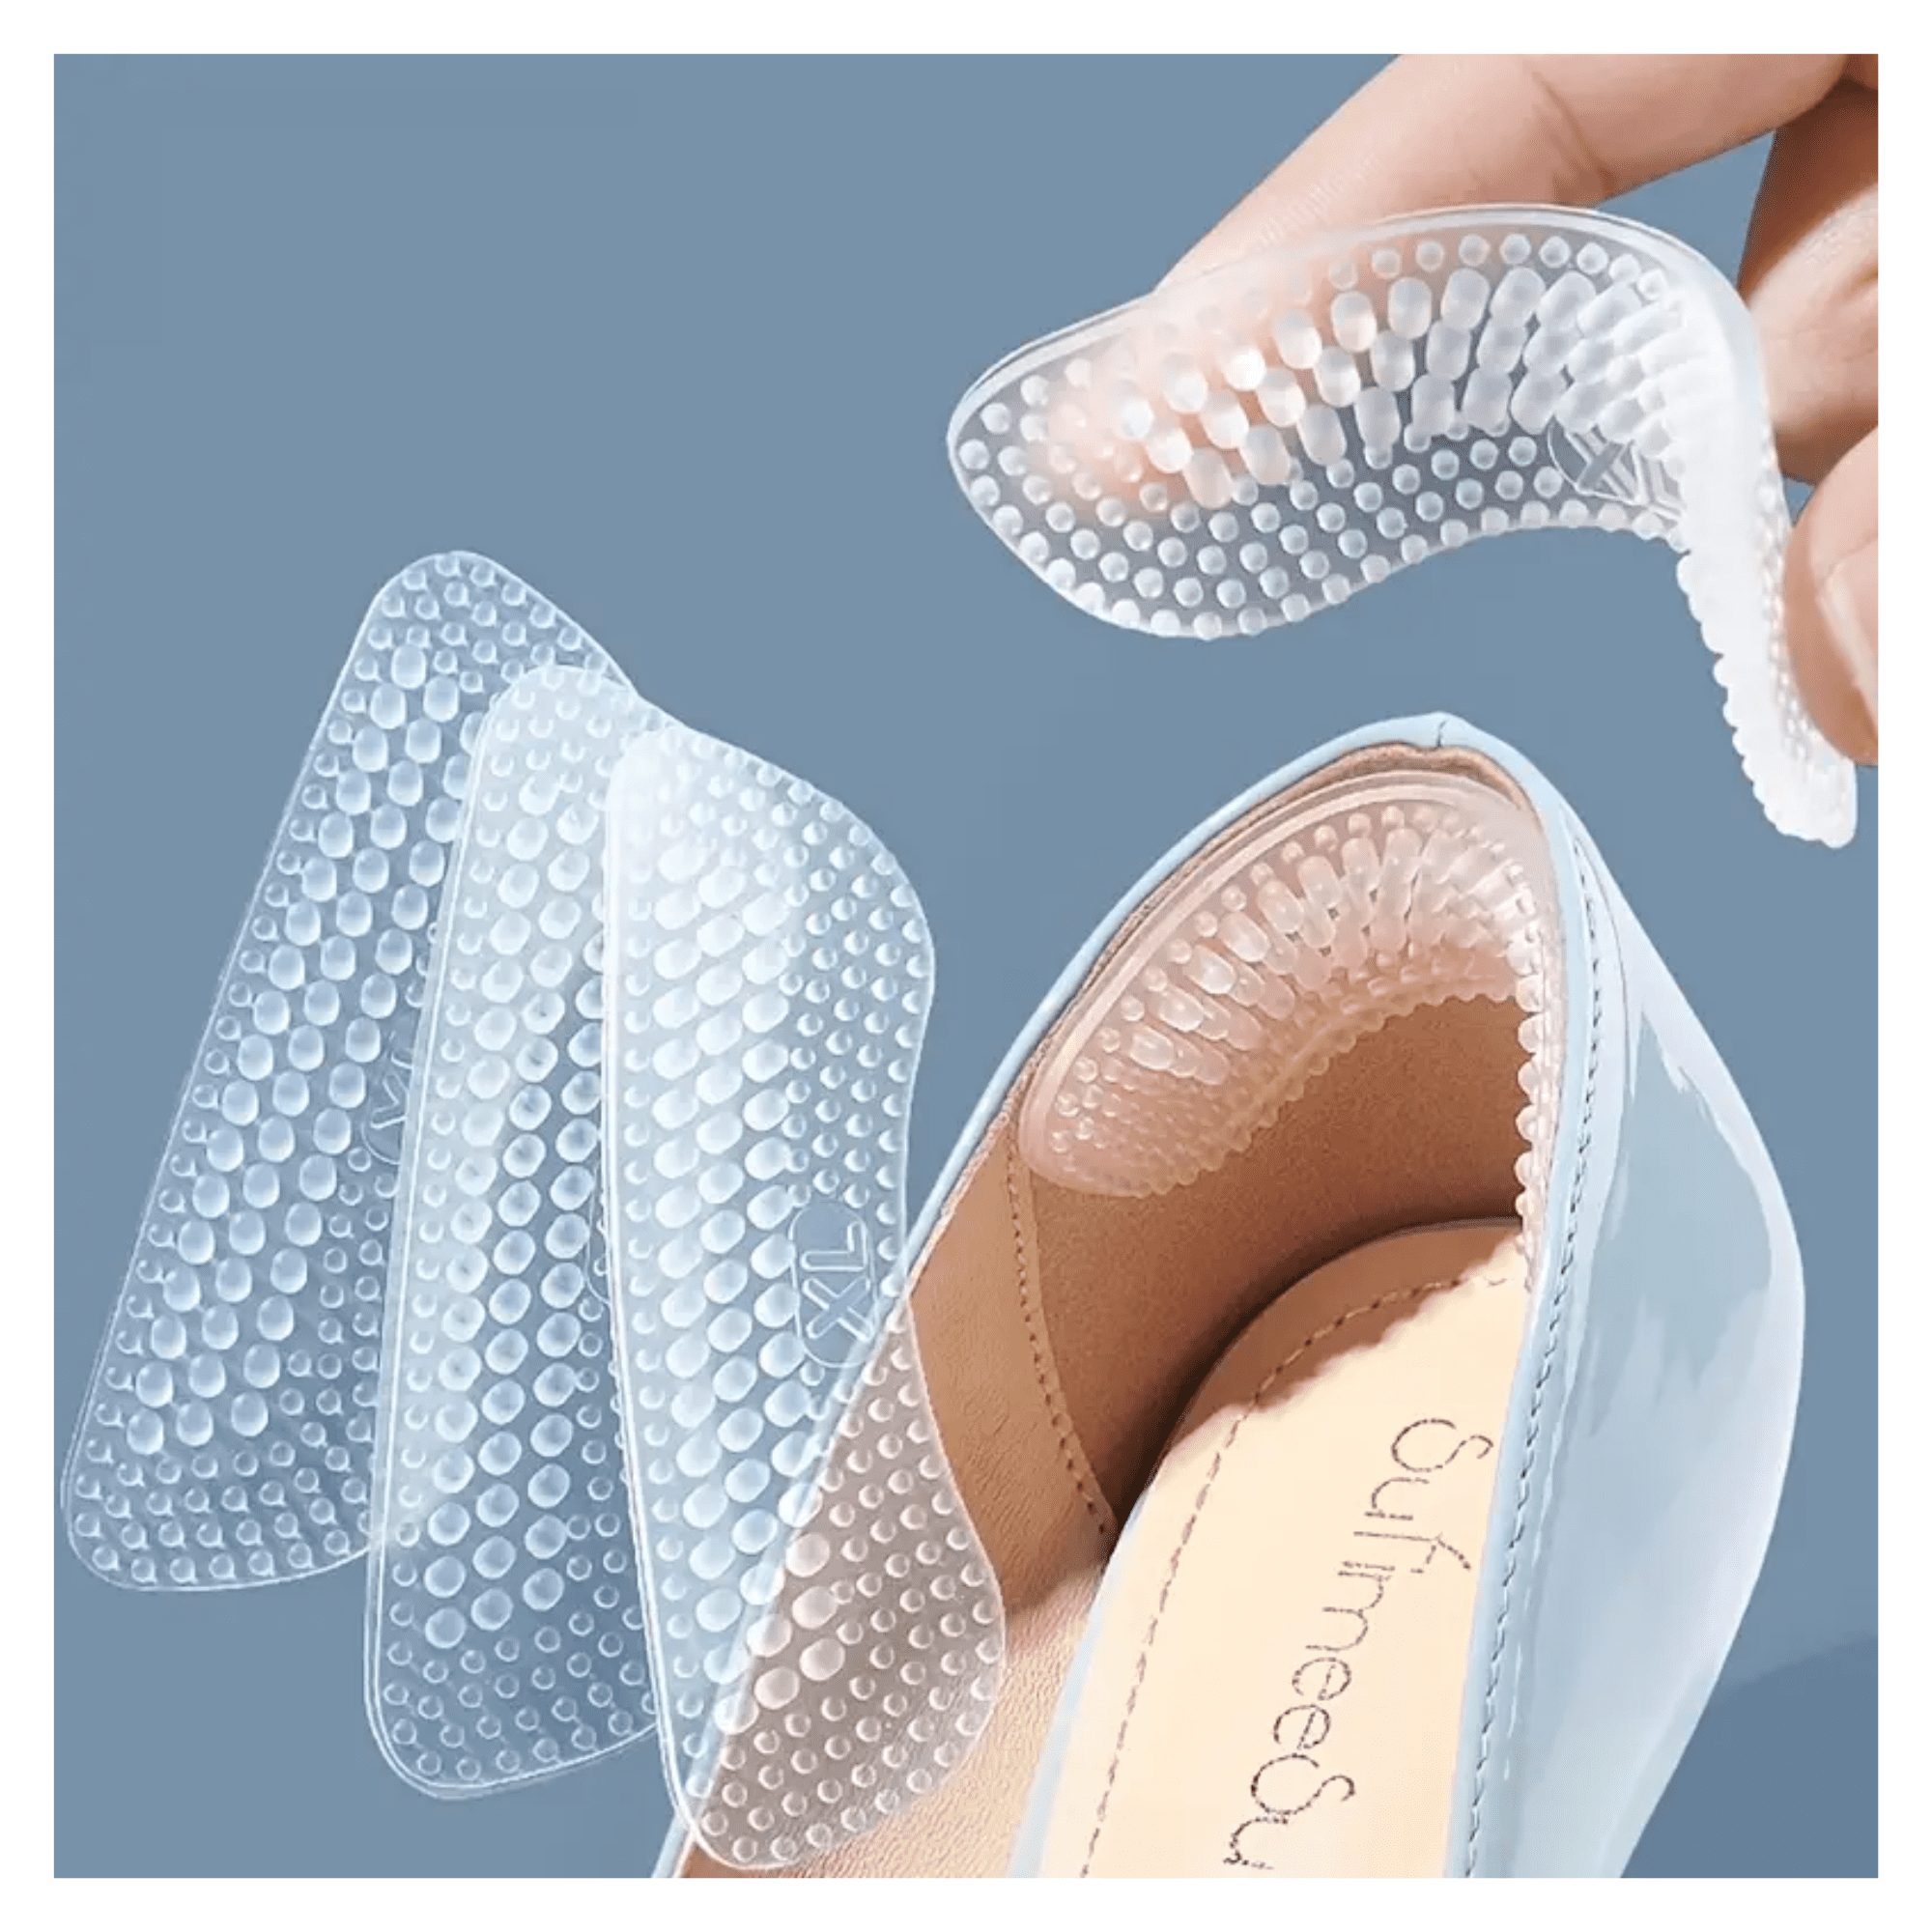 Silicone Heel Stickers Heels Grips For Women and Men Anti Slip Heel Cushions Non Slip Inserts Pads Foot Heel Care Protector 4 Pcs 2 Pair Size Large ee98062f 88af 46e8 850f ca8bc361724a.c3cb8449d82de882ff594bf41faa9464